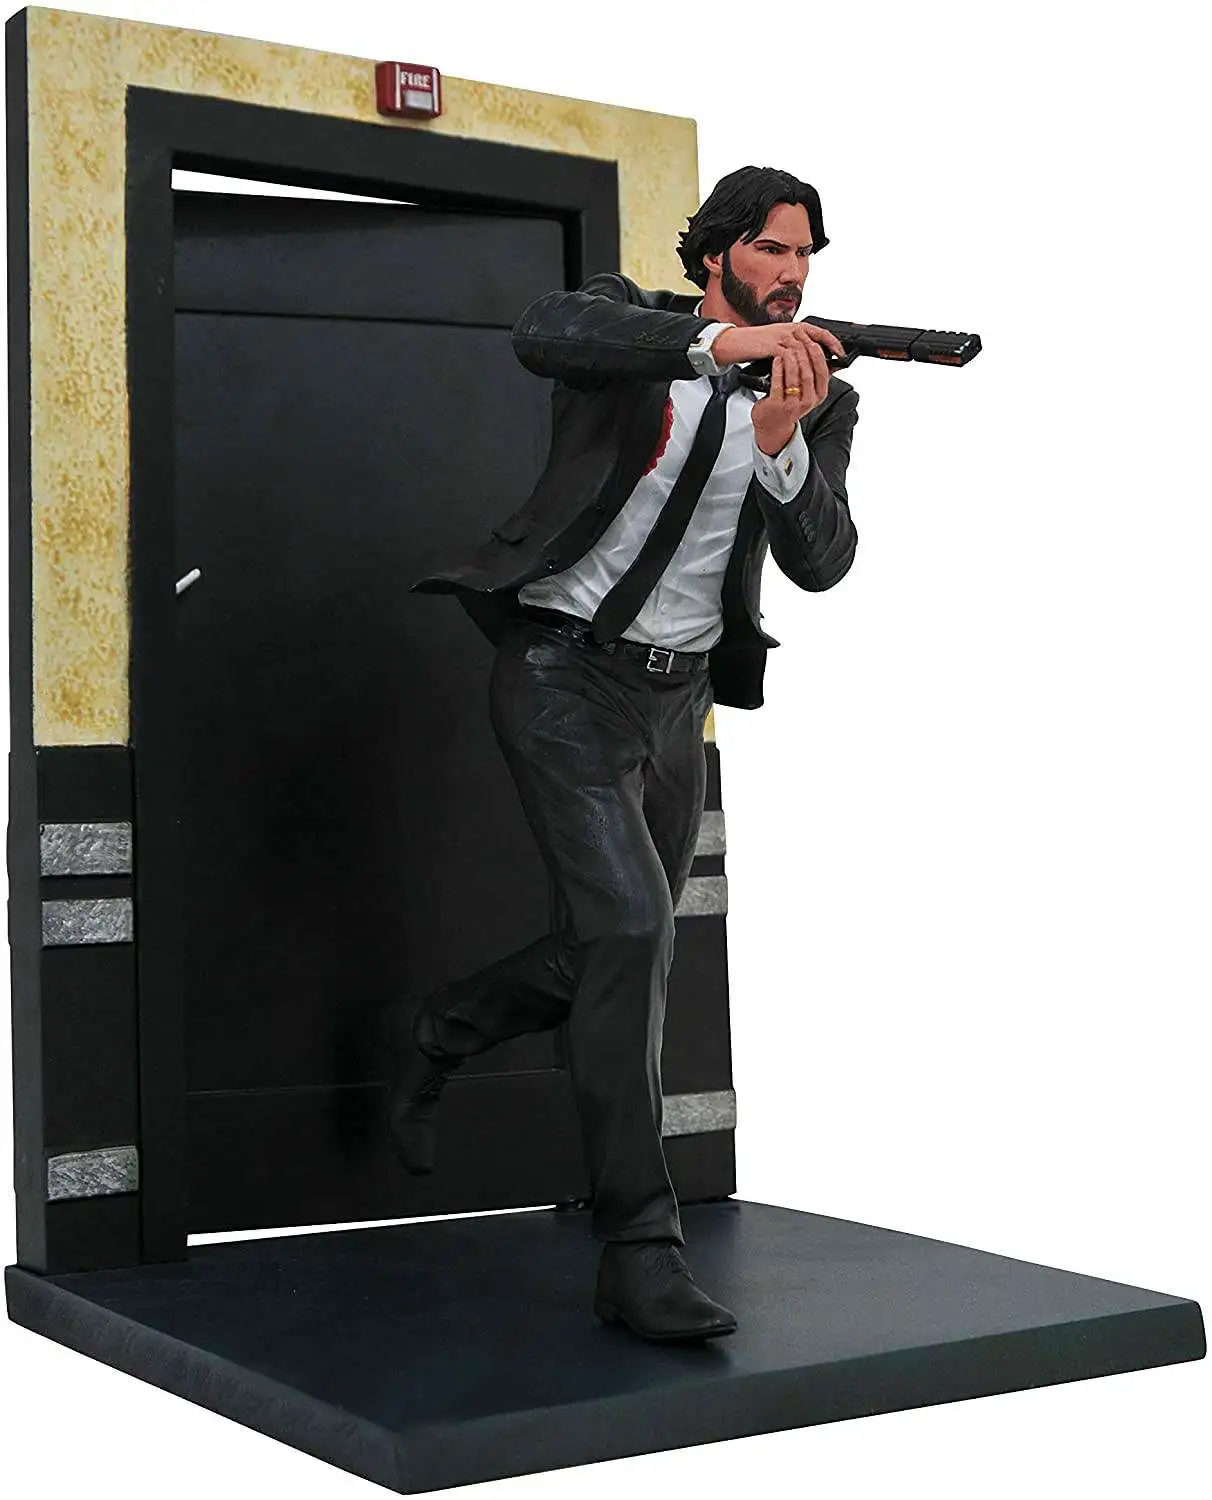 John Wick Gallery Catacombs 9 Inch PVC Statue Diamond Select for sale online 